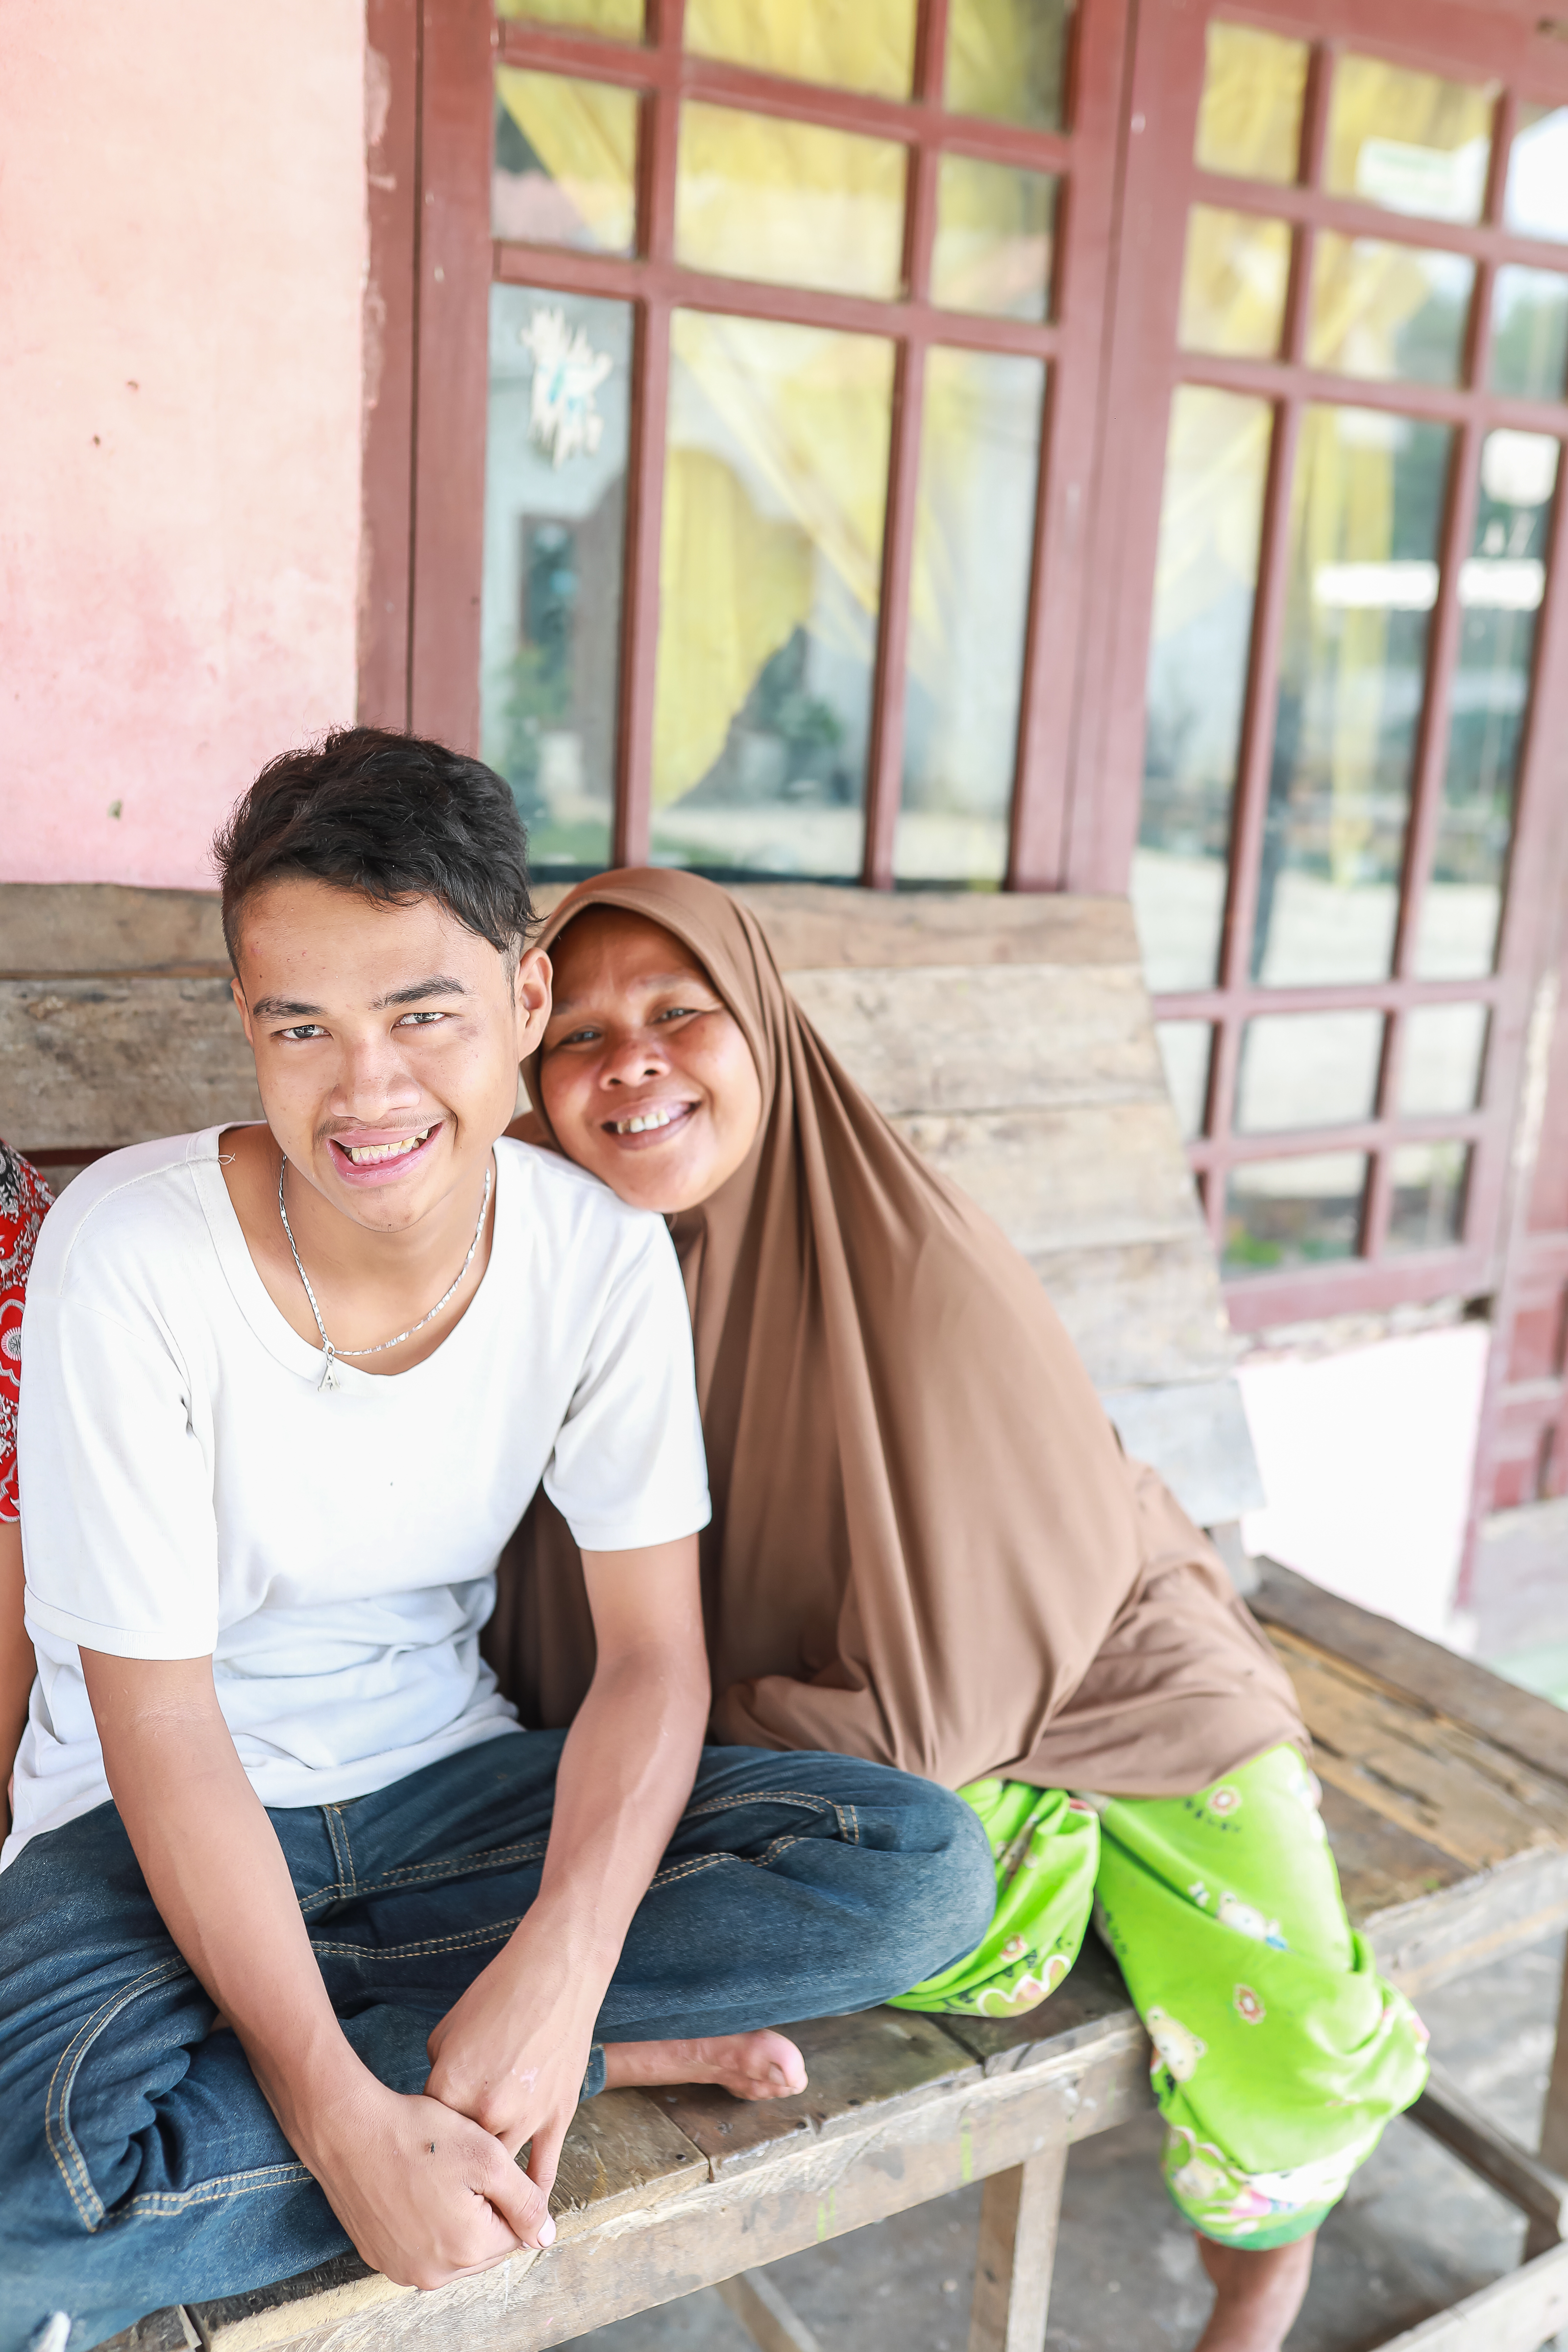 Angga smiling with his mother Nurelela after cleft surgery